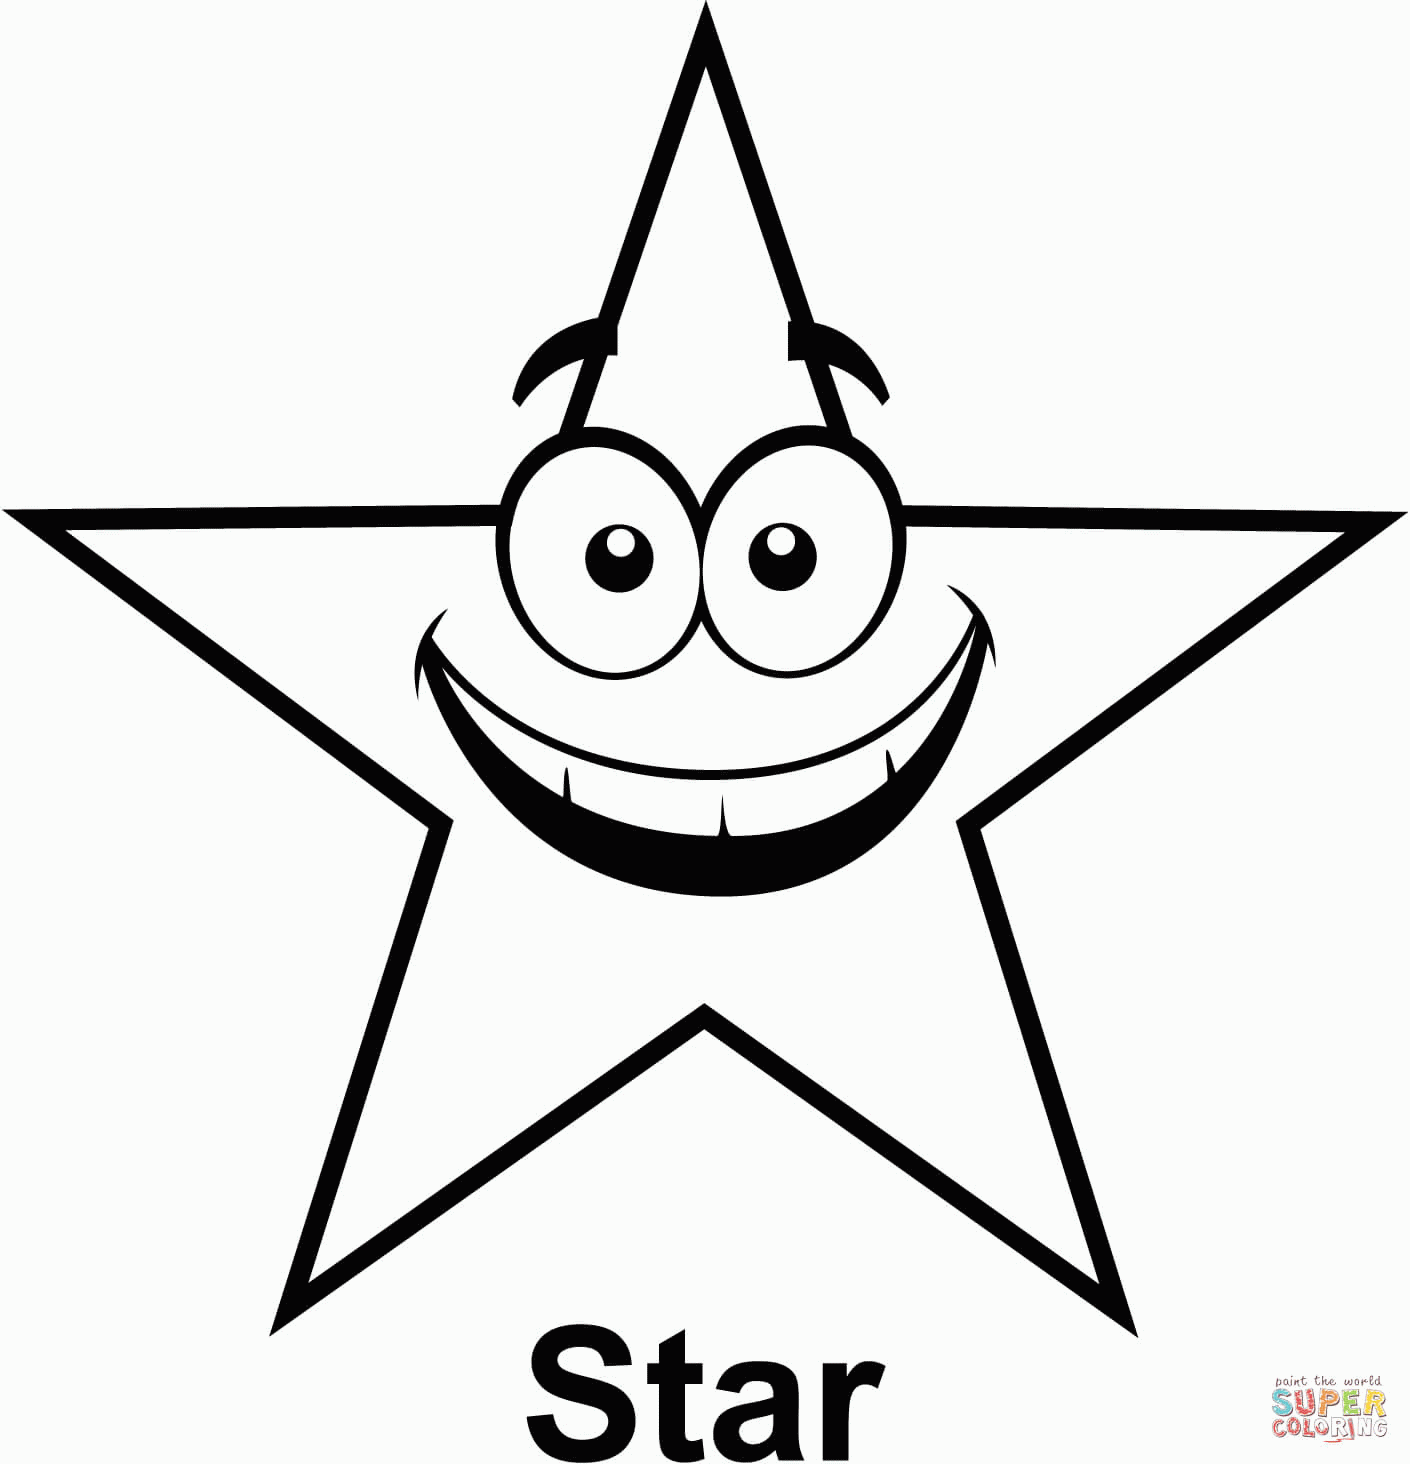 star picture to color free printable star coloring pages for kids star picture to color 